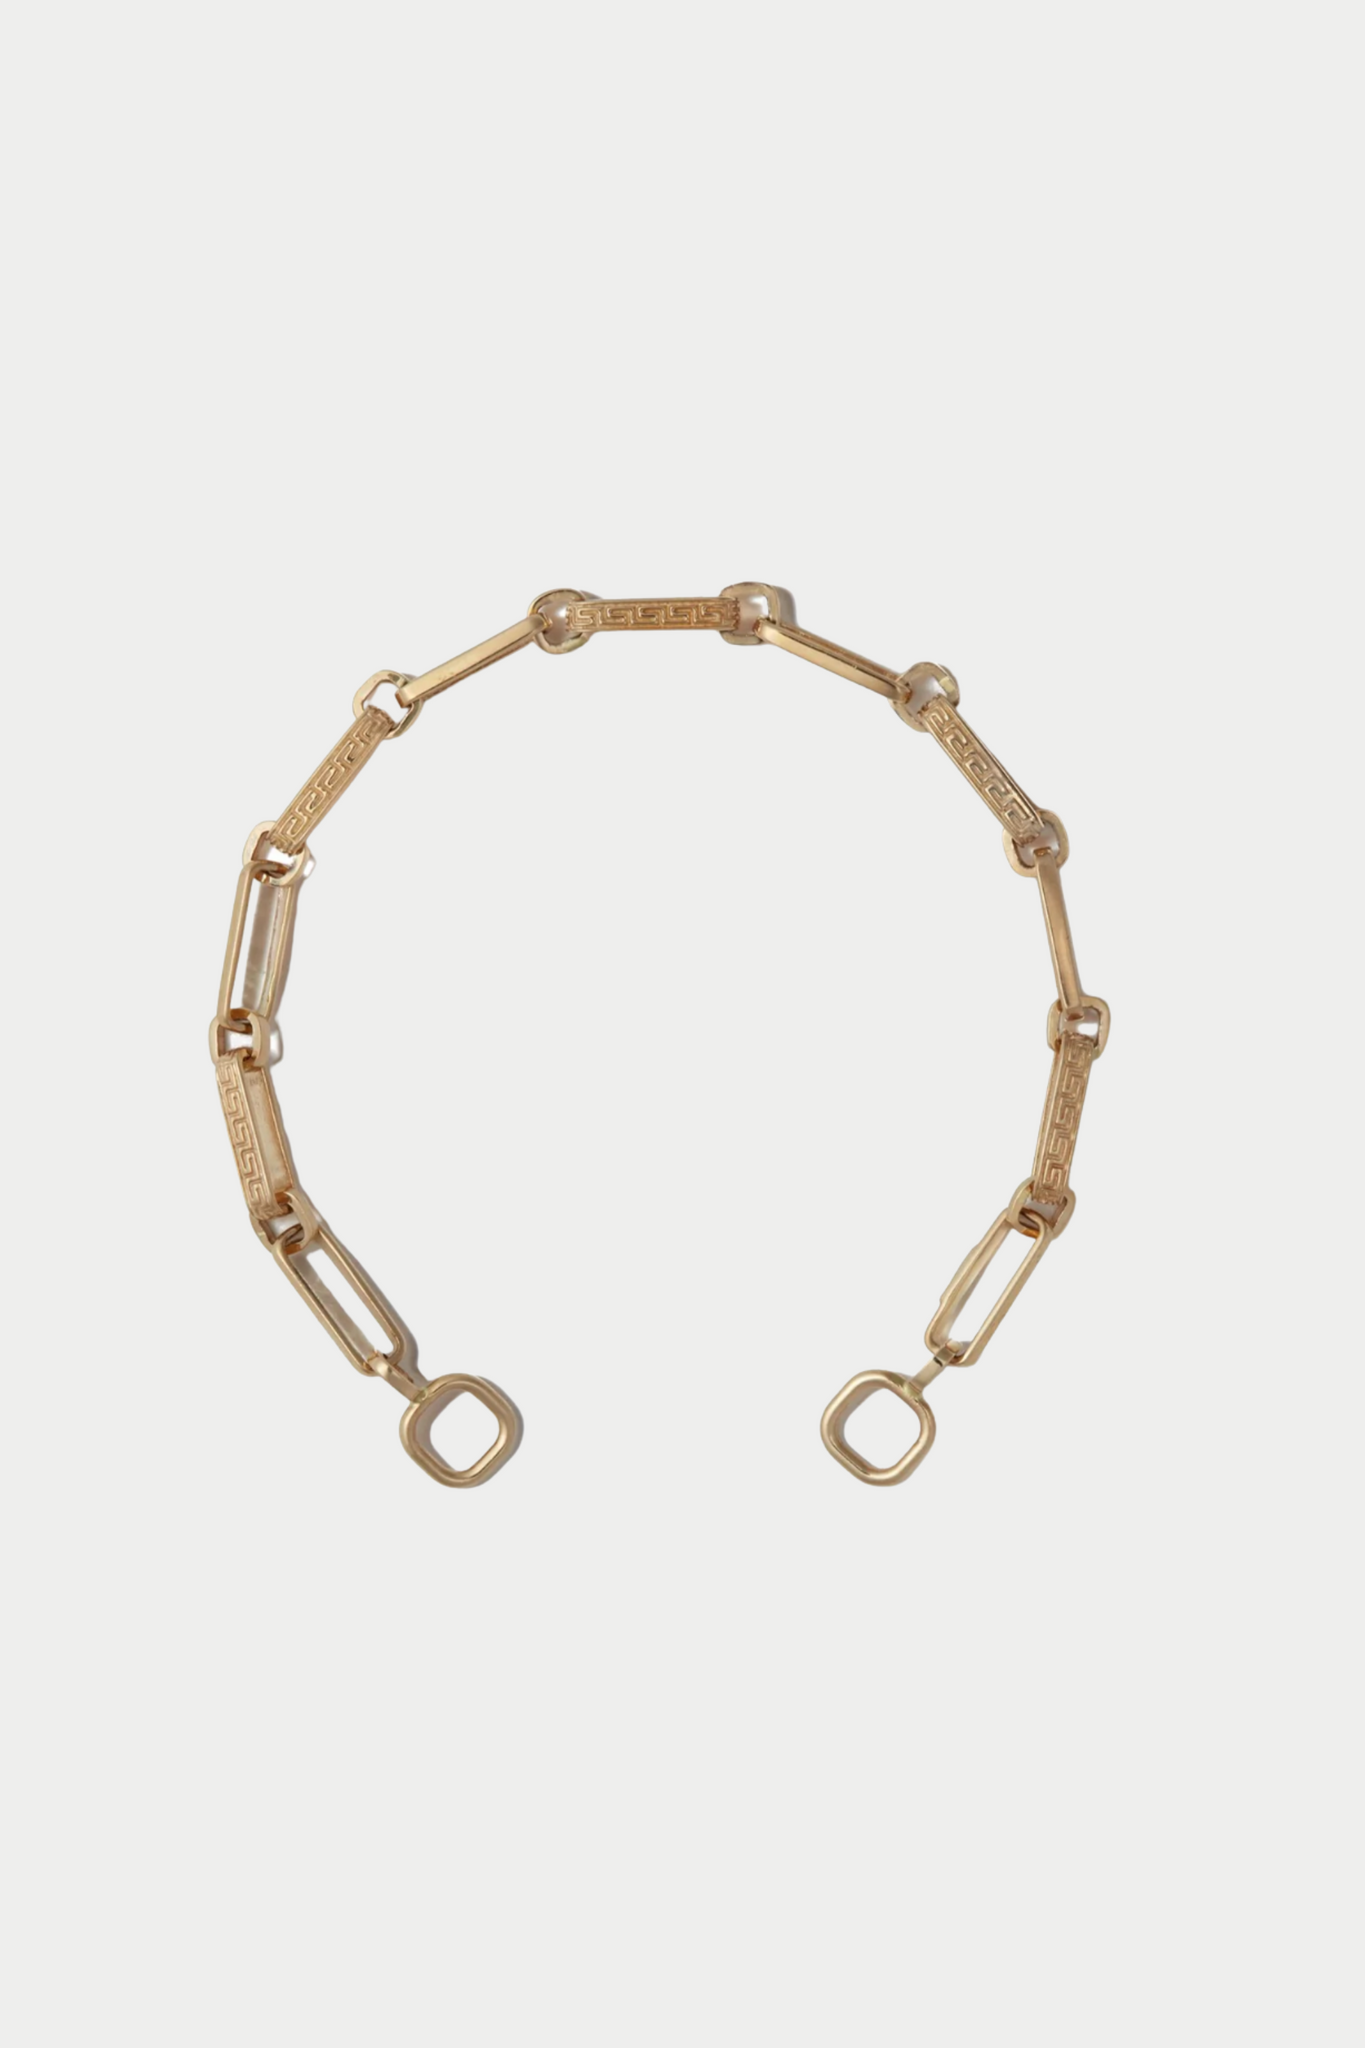 Meander Chain Bracelet, Yellow Gold